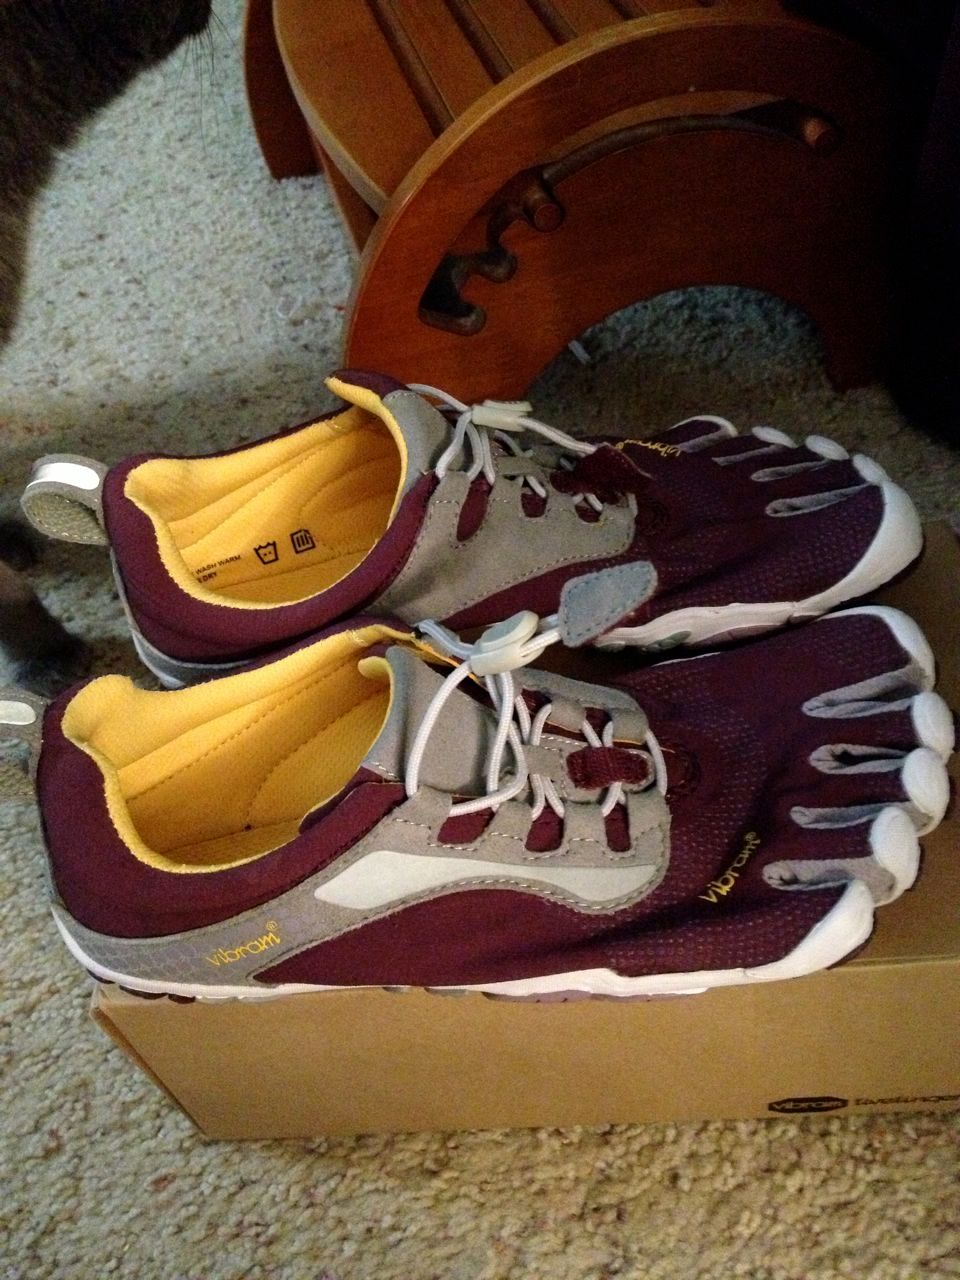  My new favorite shoes, a pair of Bikila LS 